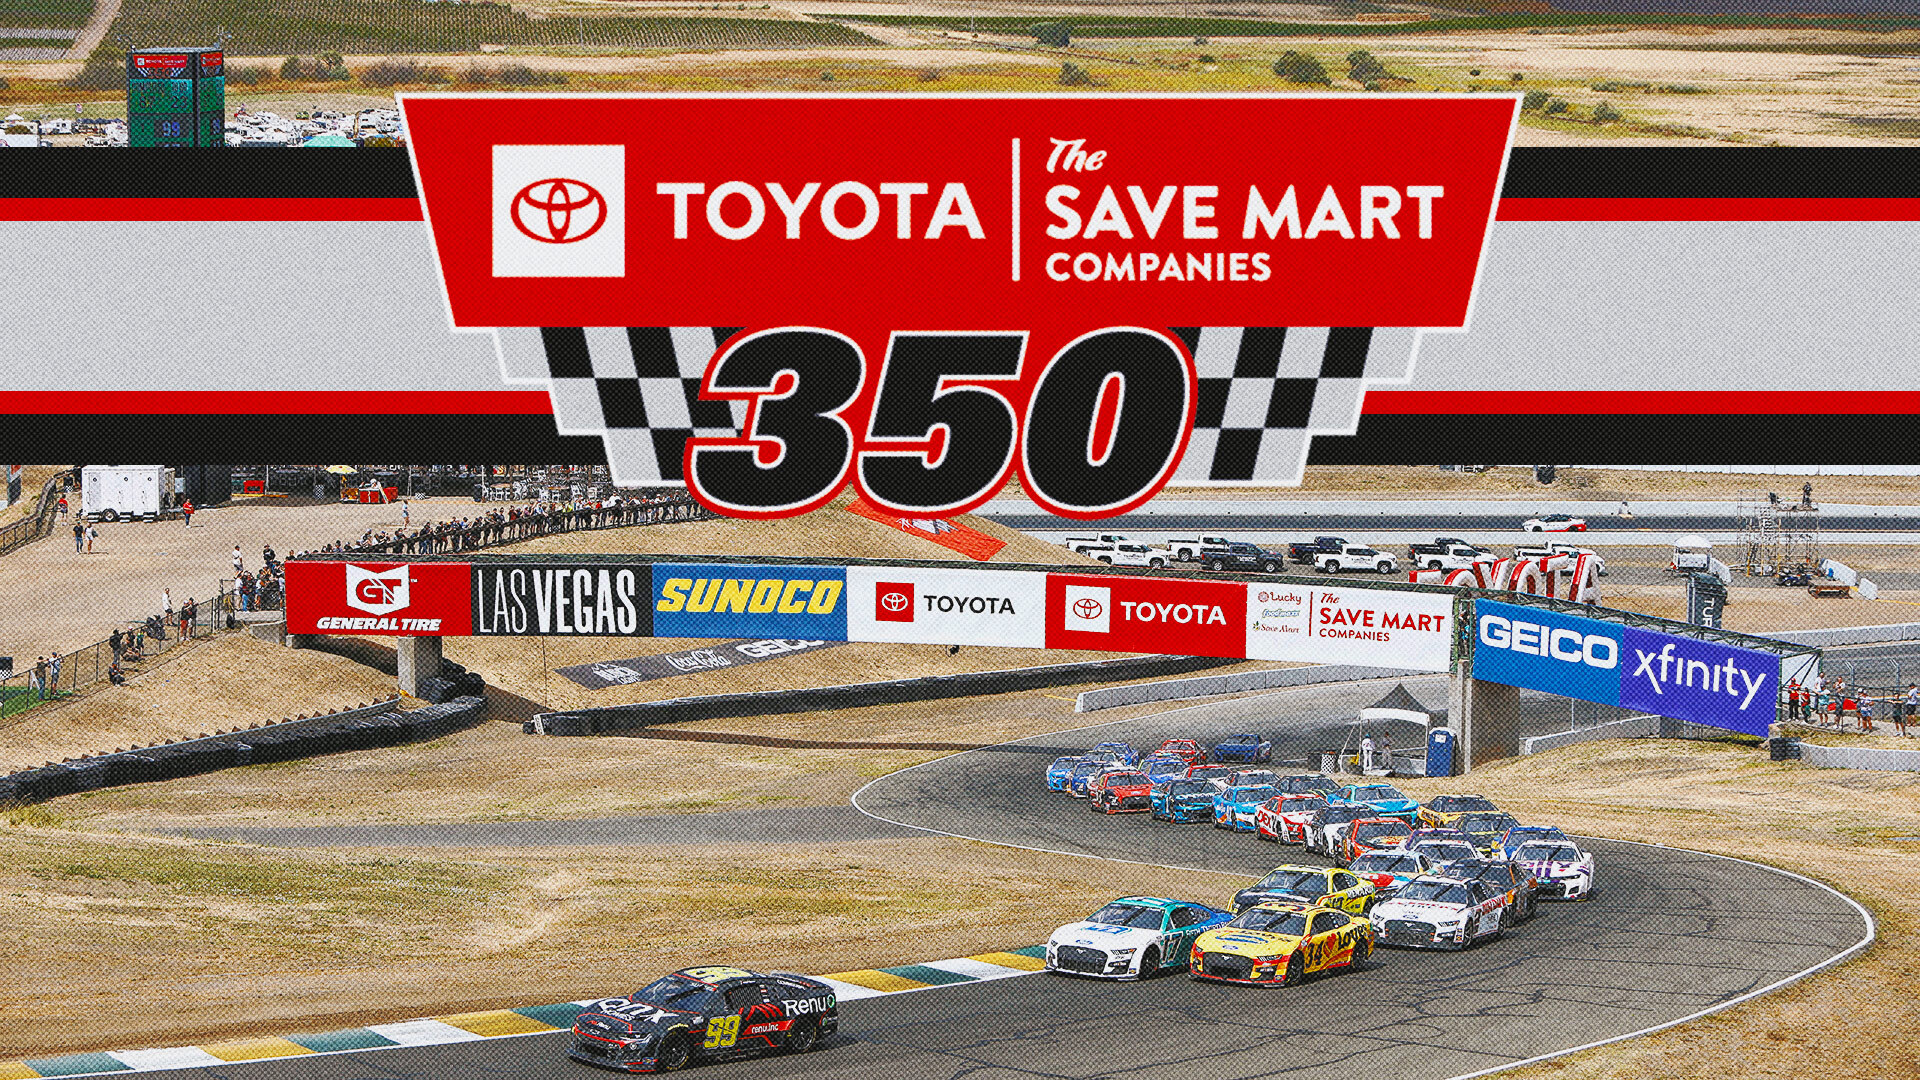 Toyota/Save Mart 350 live updates: Top moments from Sonoma Raceway